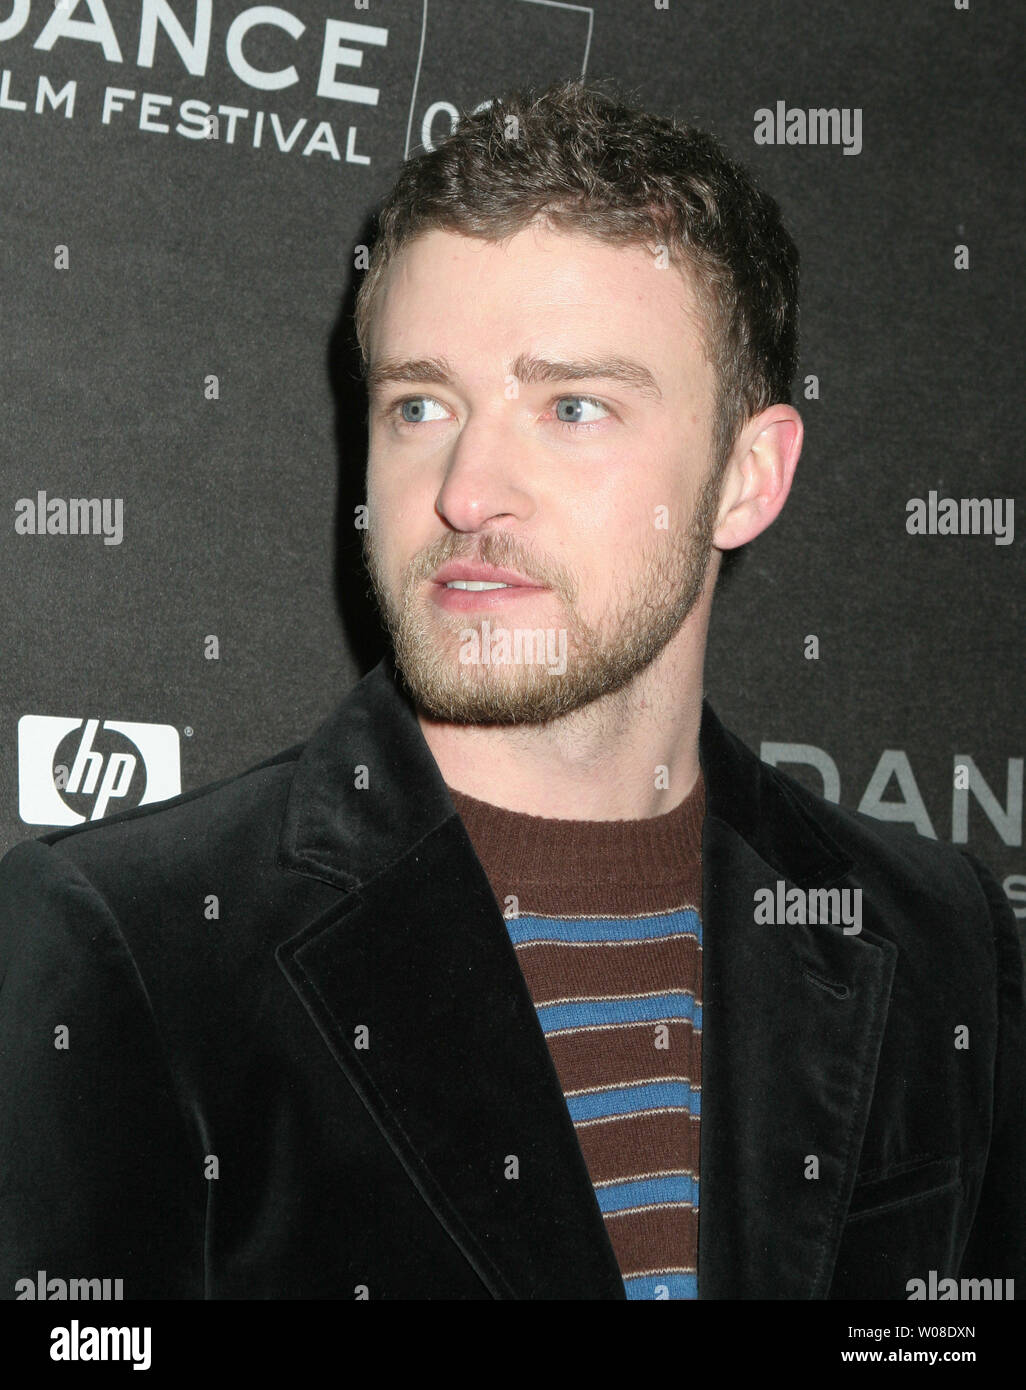 Justine Timberlake arrives at the premiere of "Alpha Dog" at the Eccles Center for Sundance 06 on January 26, 2006 in Park City, Utah.   (UPI Photo/Roger Wong) Stock Photo